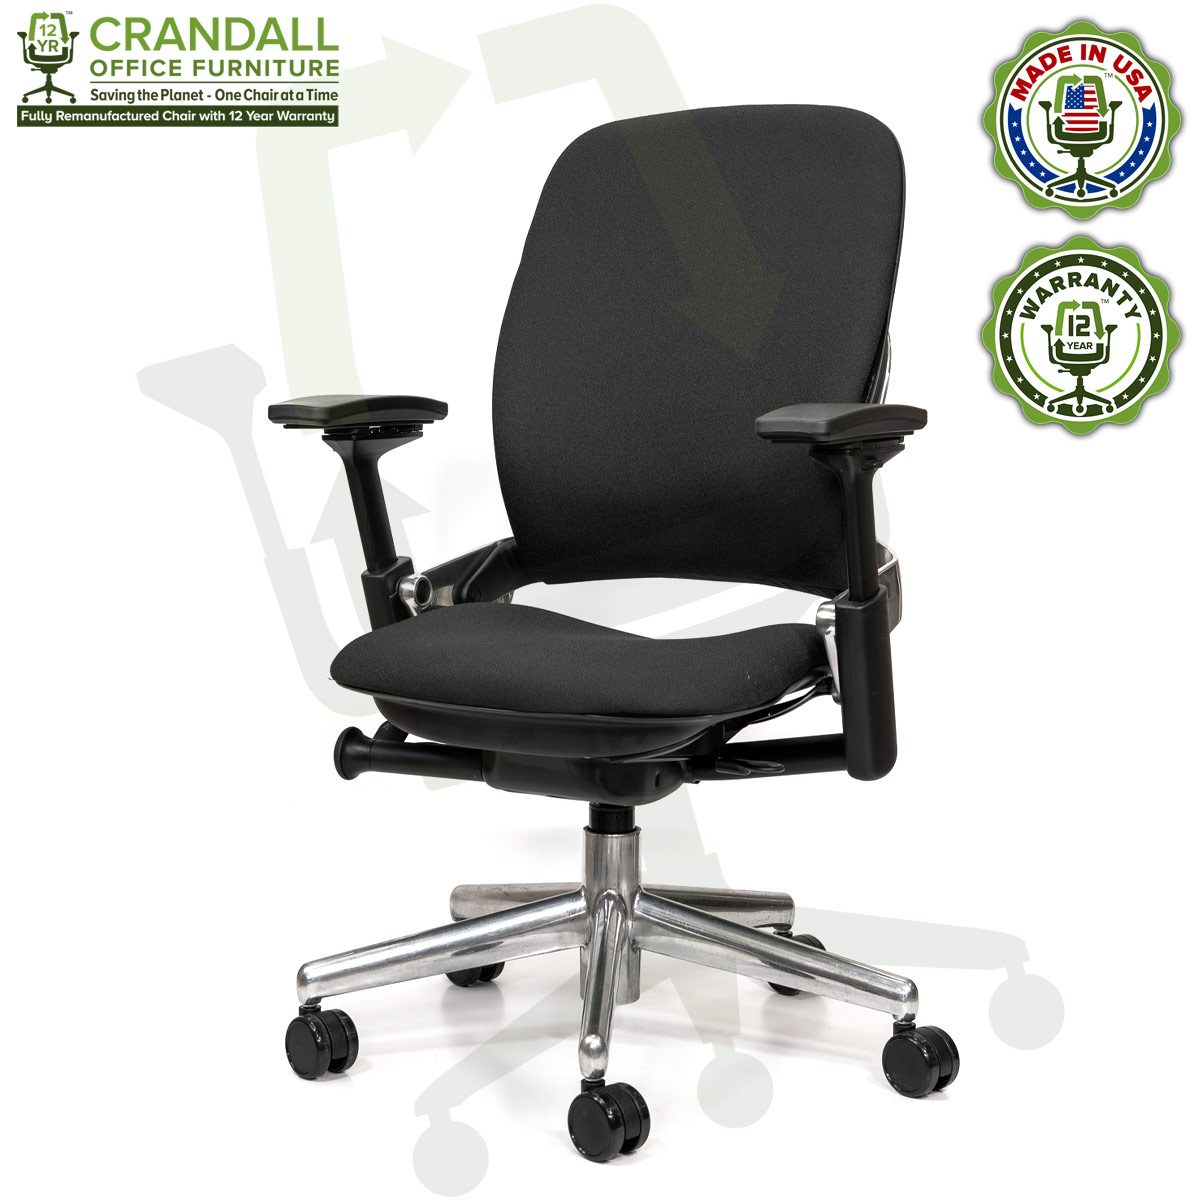 Crandall Office Furniture Remanufactured Steelcase V2 Leap Chair - Polished Aluminum Frame 02